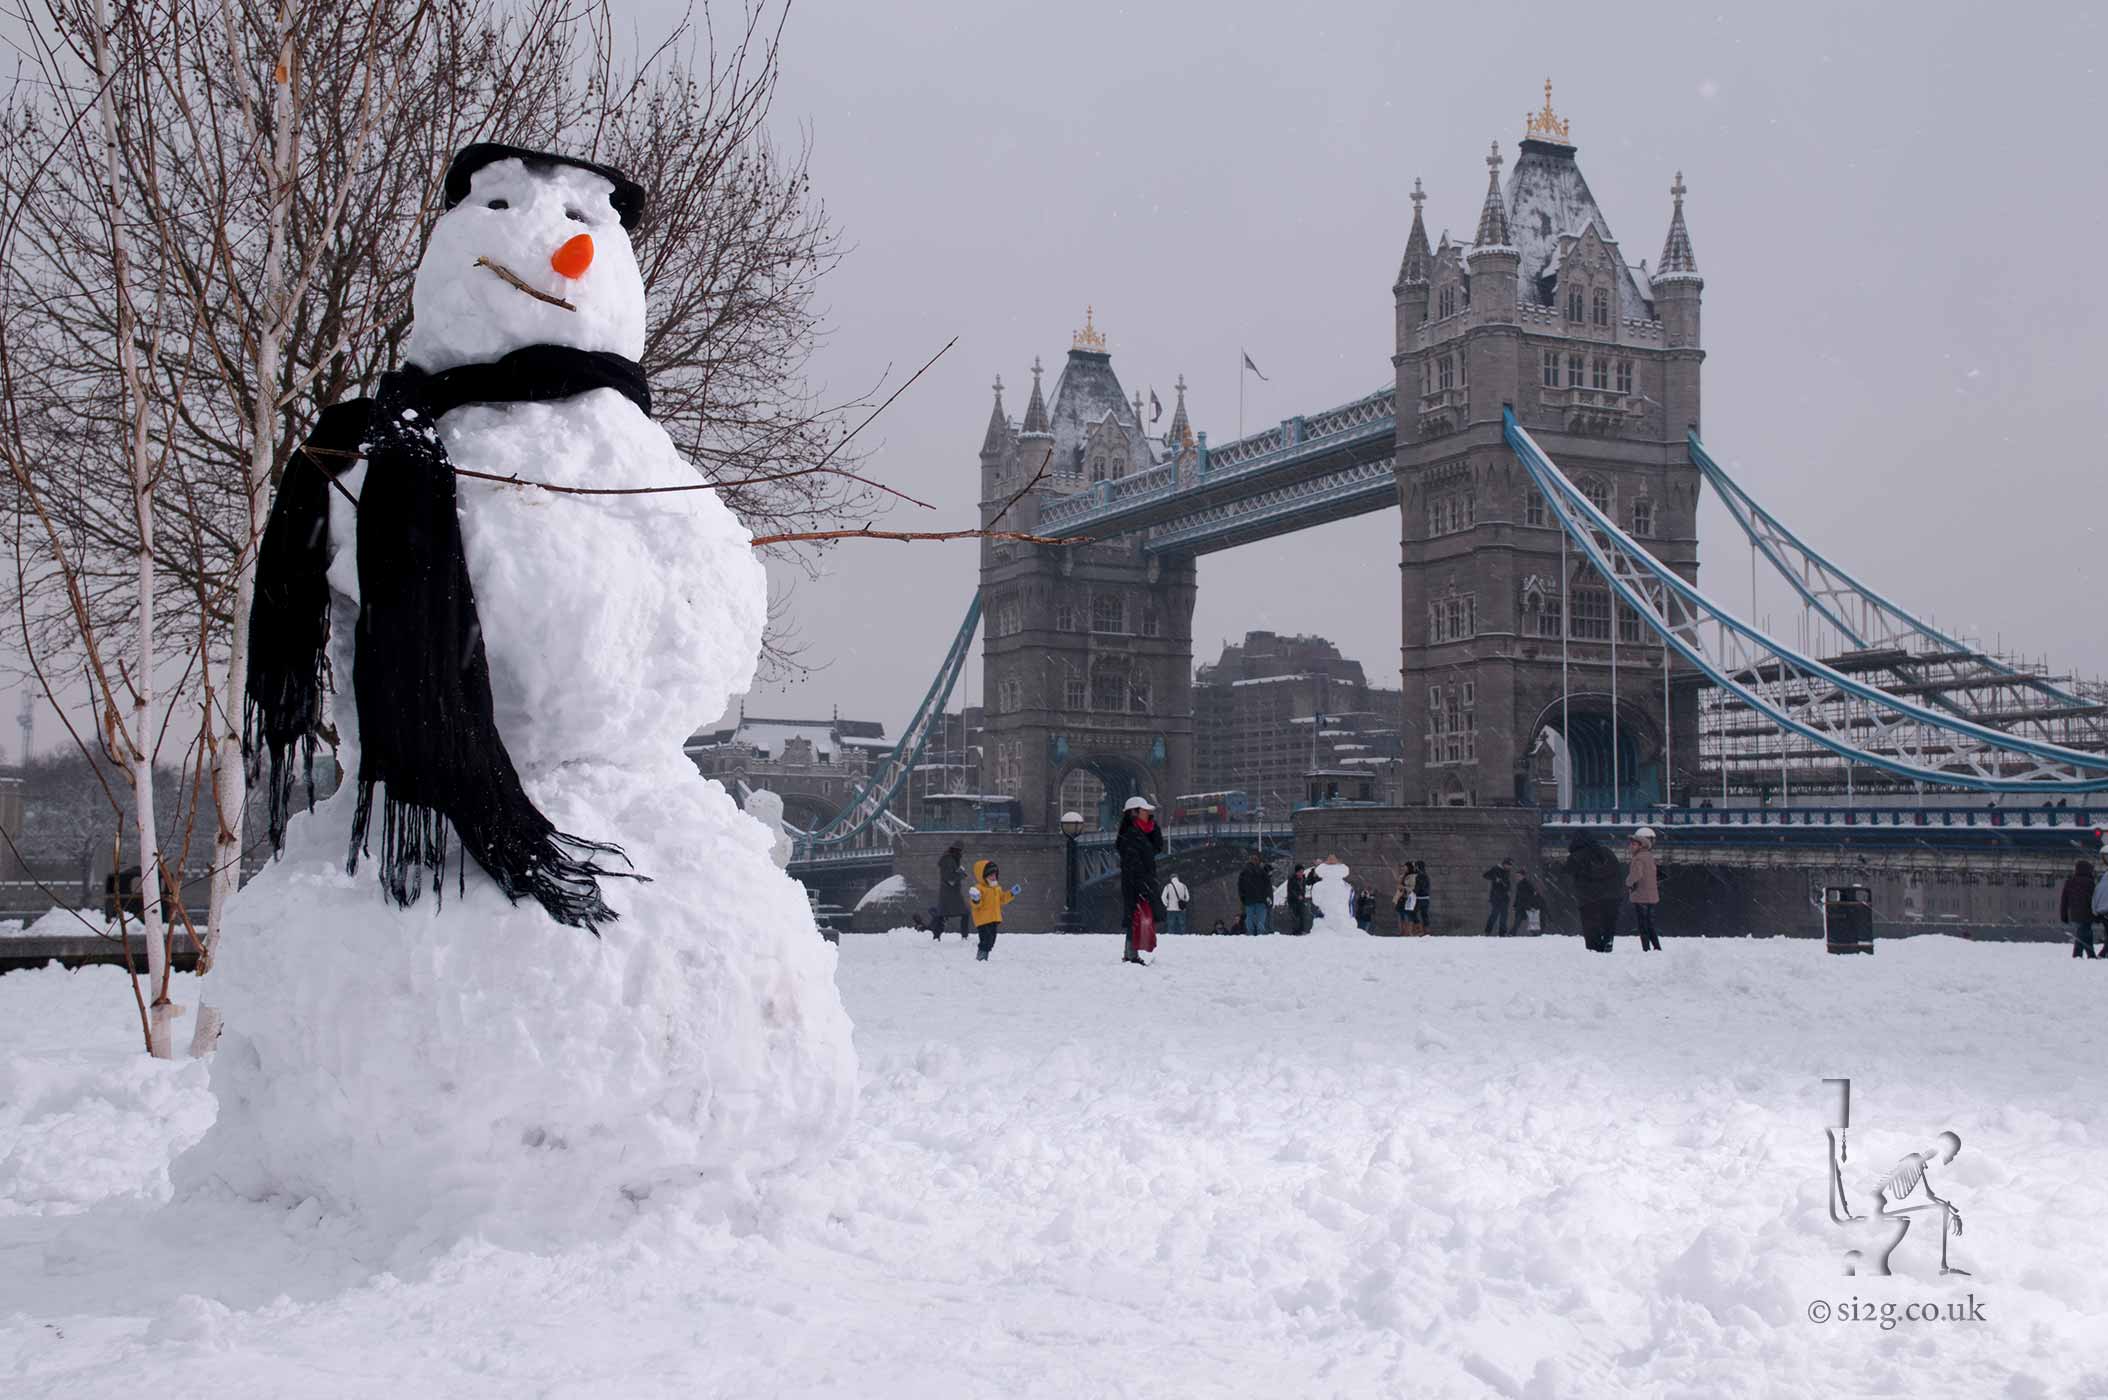 Snowman Tourist - One of our most popular photographs - a snowman visiting Tower Bridge in London.  This photo was taken on a rare occasion when the snow closed most of London.  The tubes were off and all but the most important roads were covered in deep snow.  We hiked for an hour and a half in knee-deep snow to reach Tower Bridge.